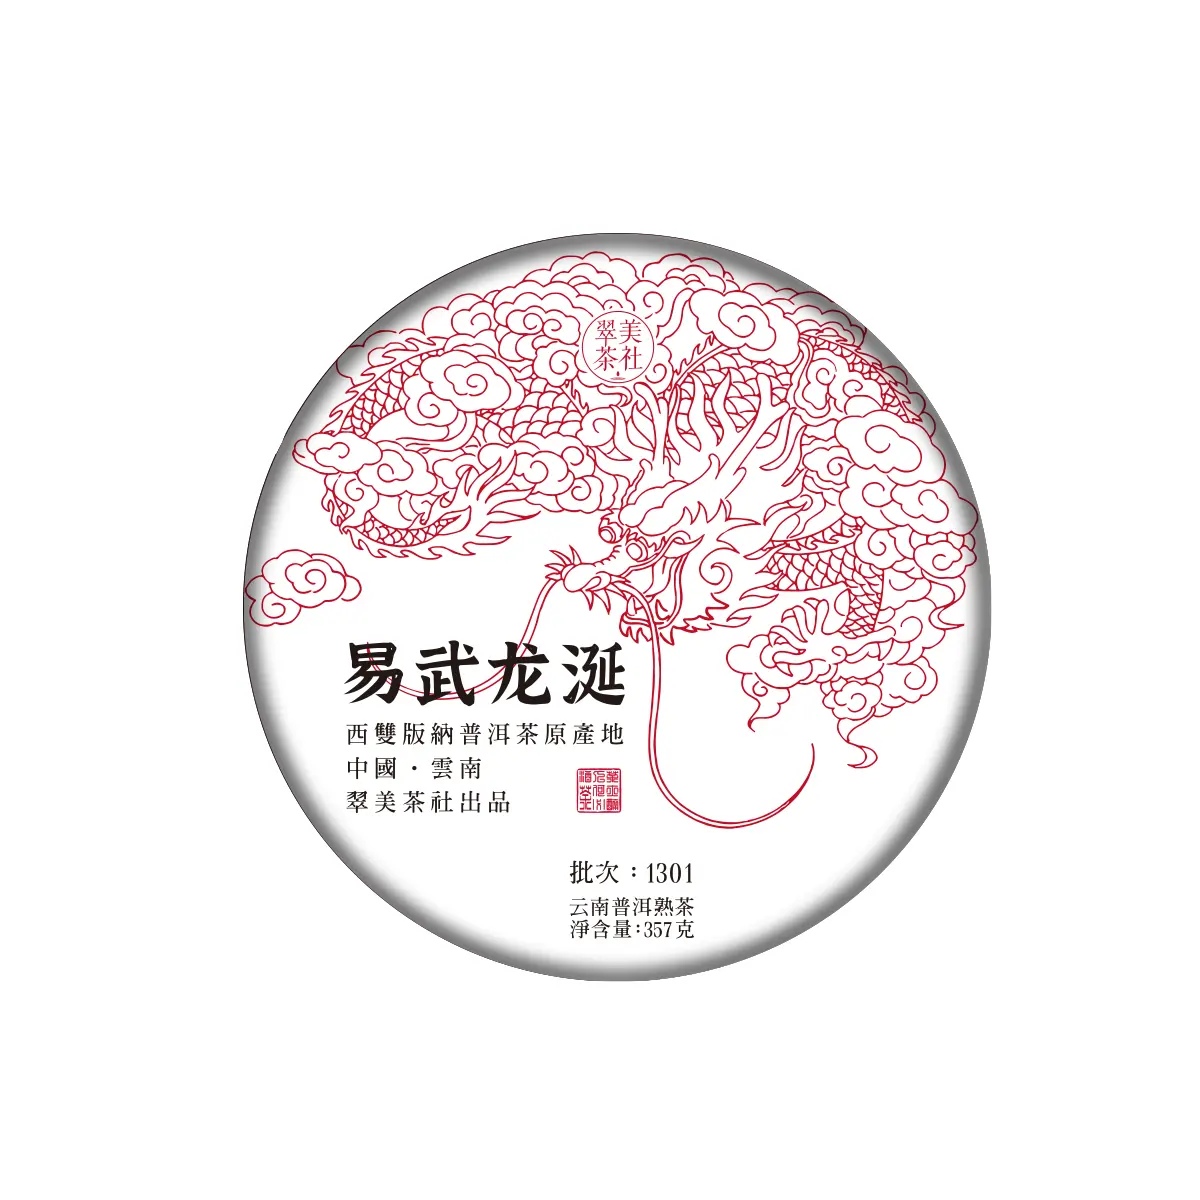 Hand Made organic slimming tea Lower cholesterol puer cooked tea